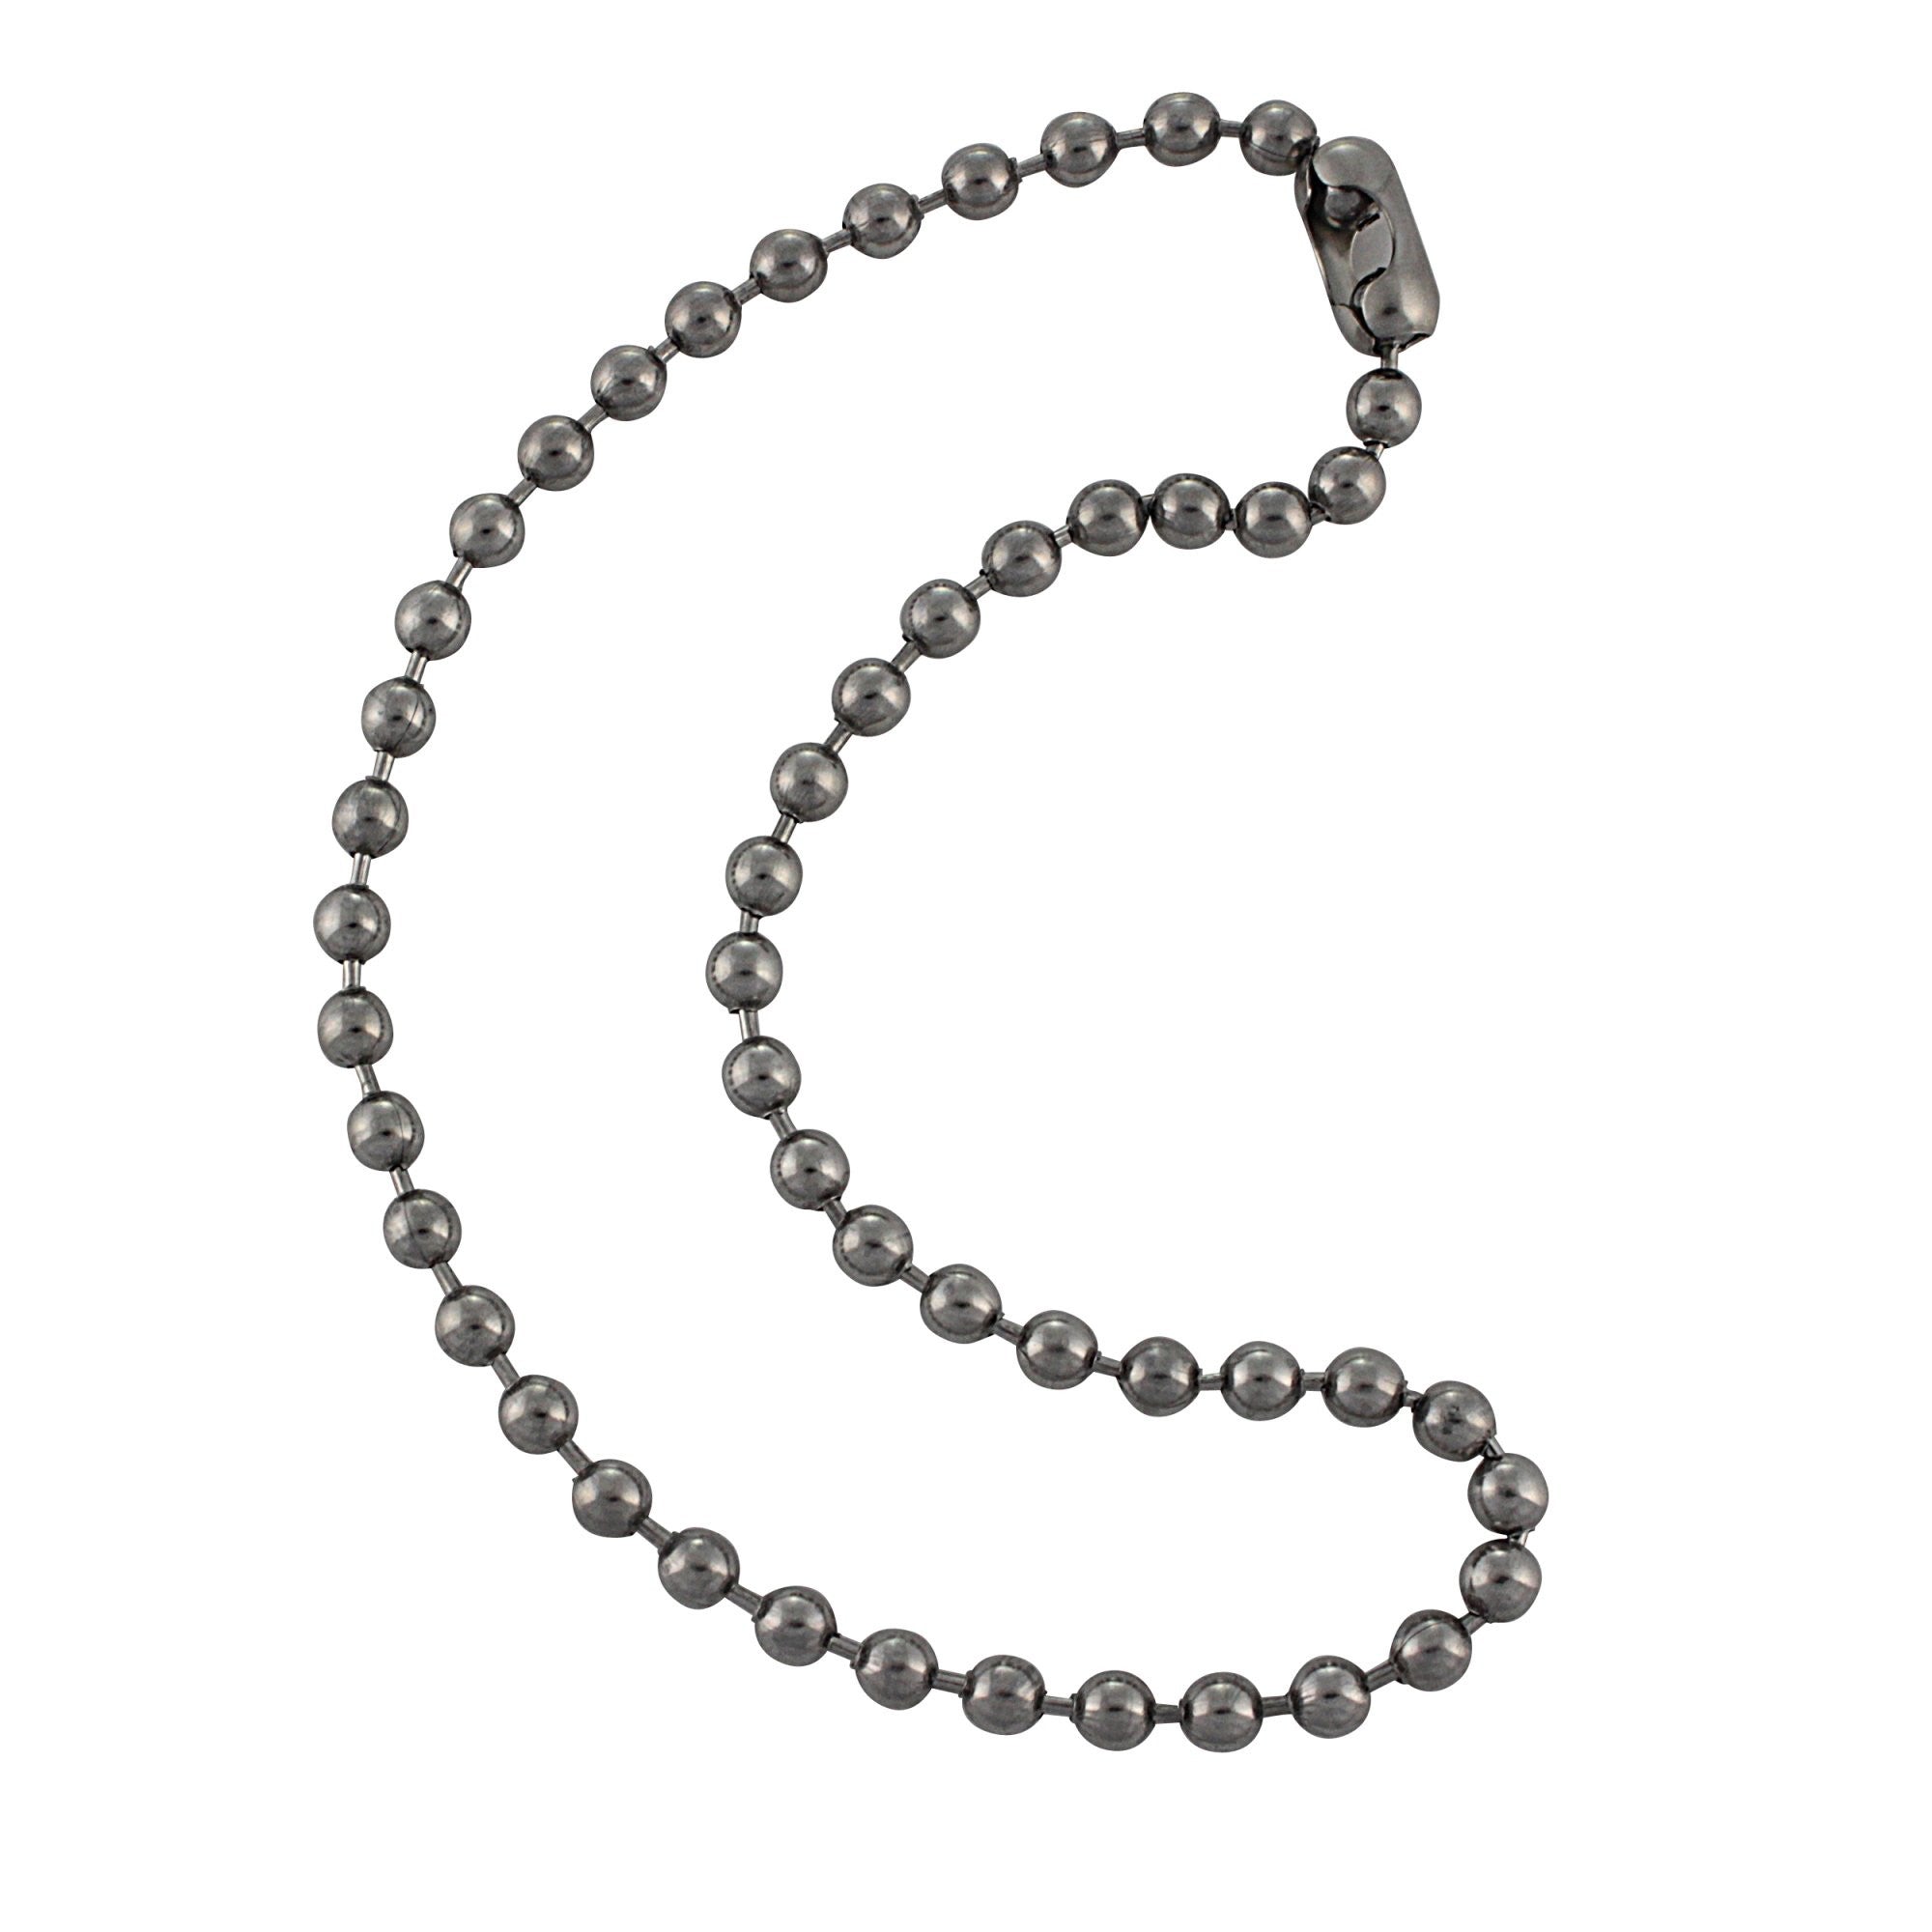 Stainless Steel (AISI 304) Chain / Chain Link / Rantai - 2mm, 3mm, 4mm, 5mm  (1 meter)